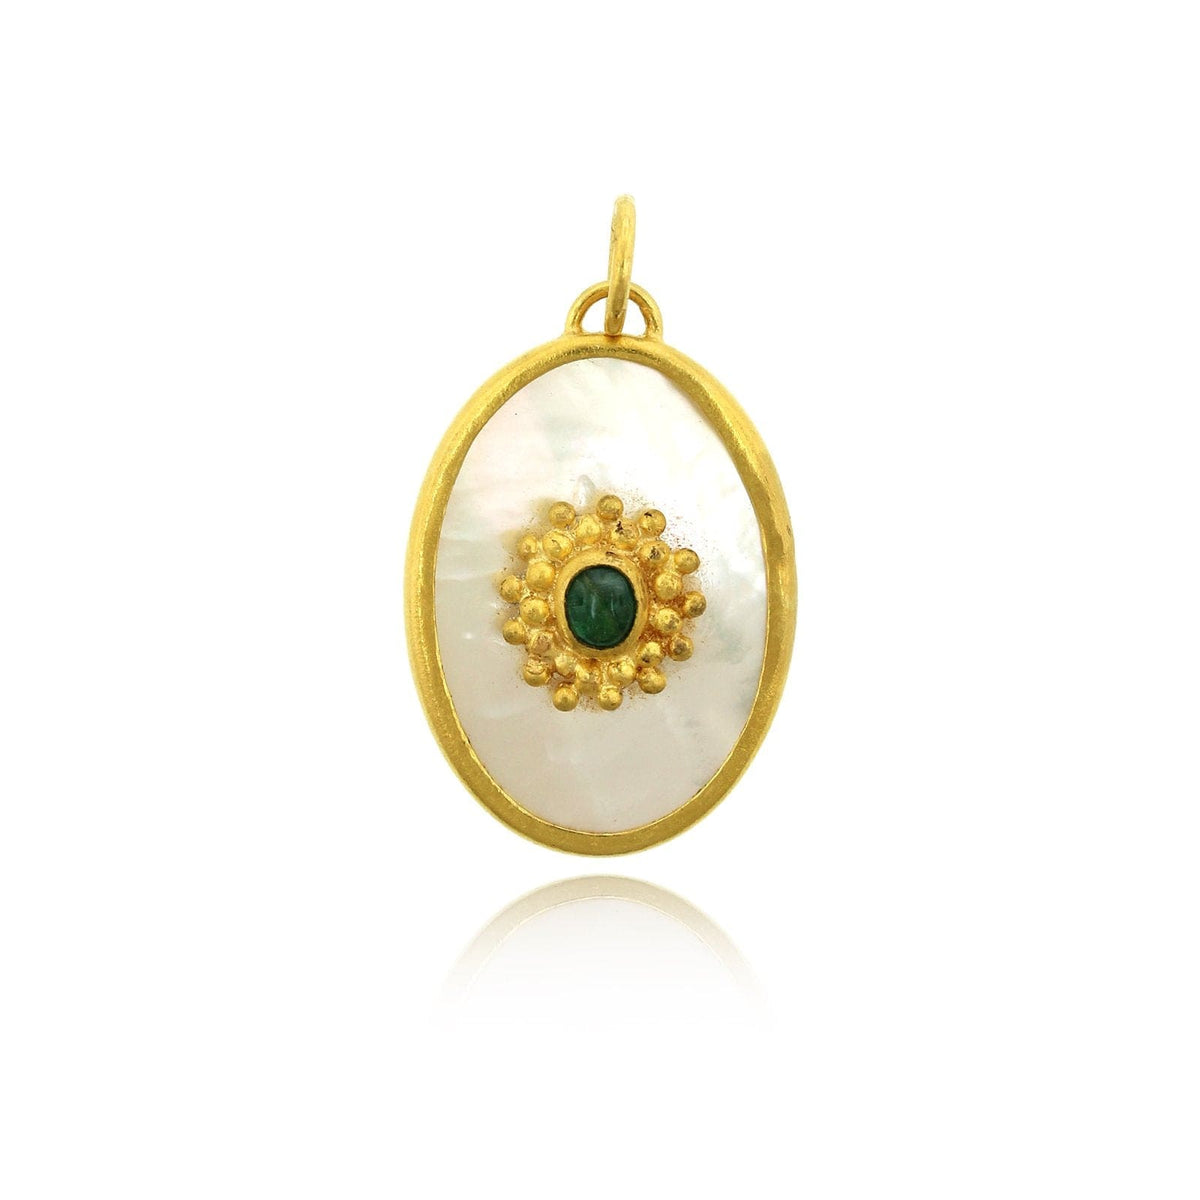 24K Yellow Gold Emerald and Mother of Pearl Charm